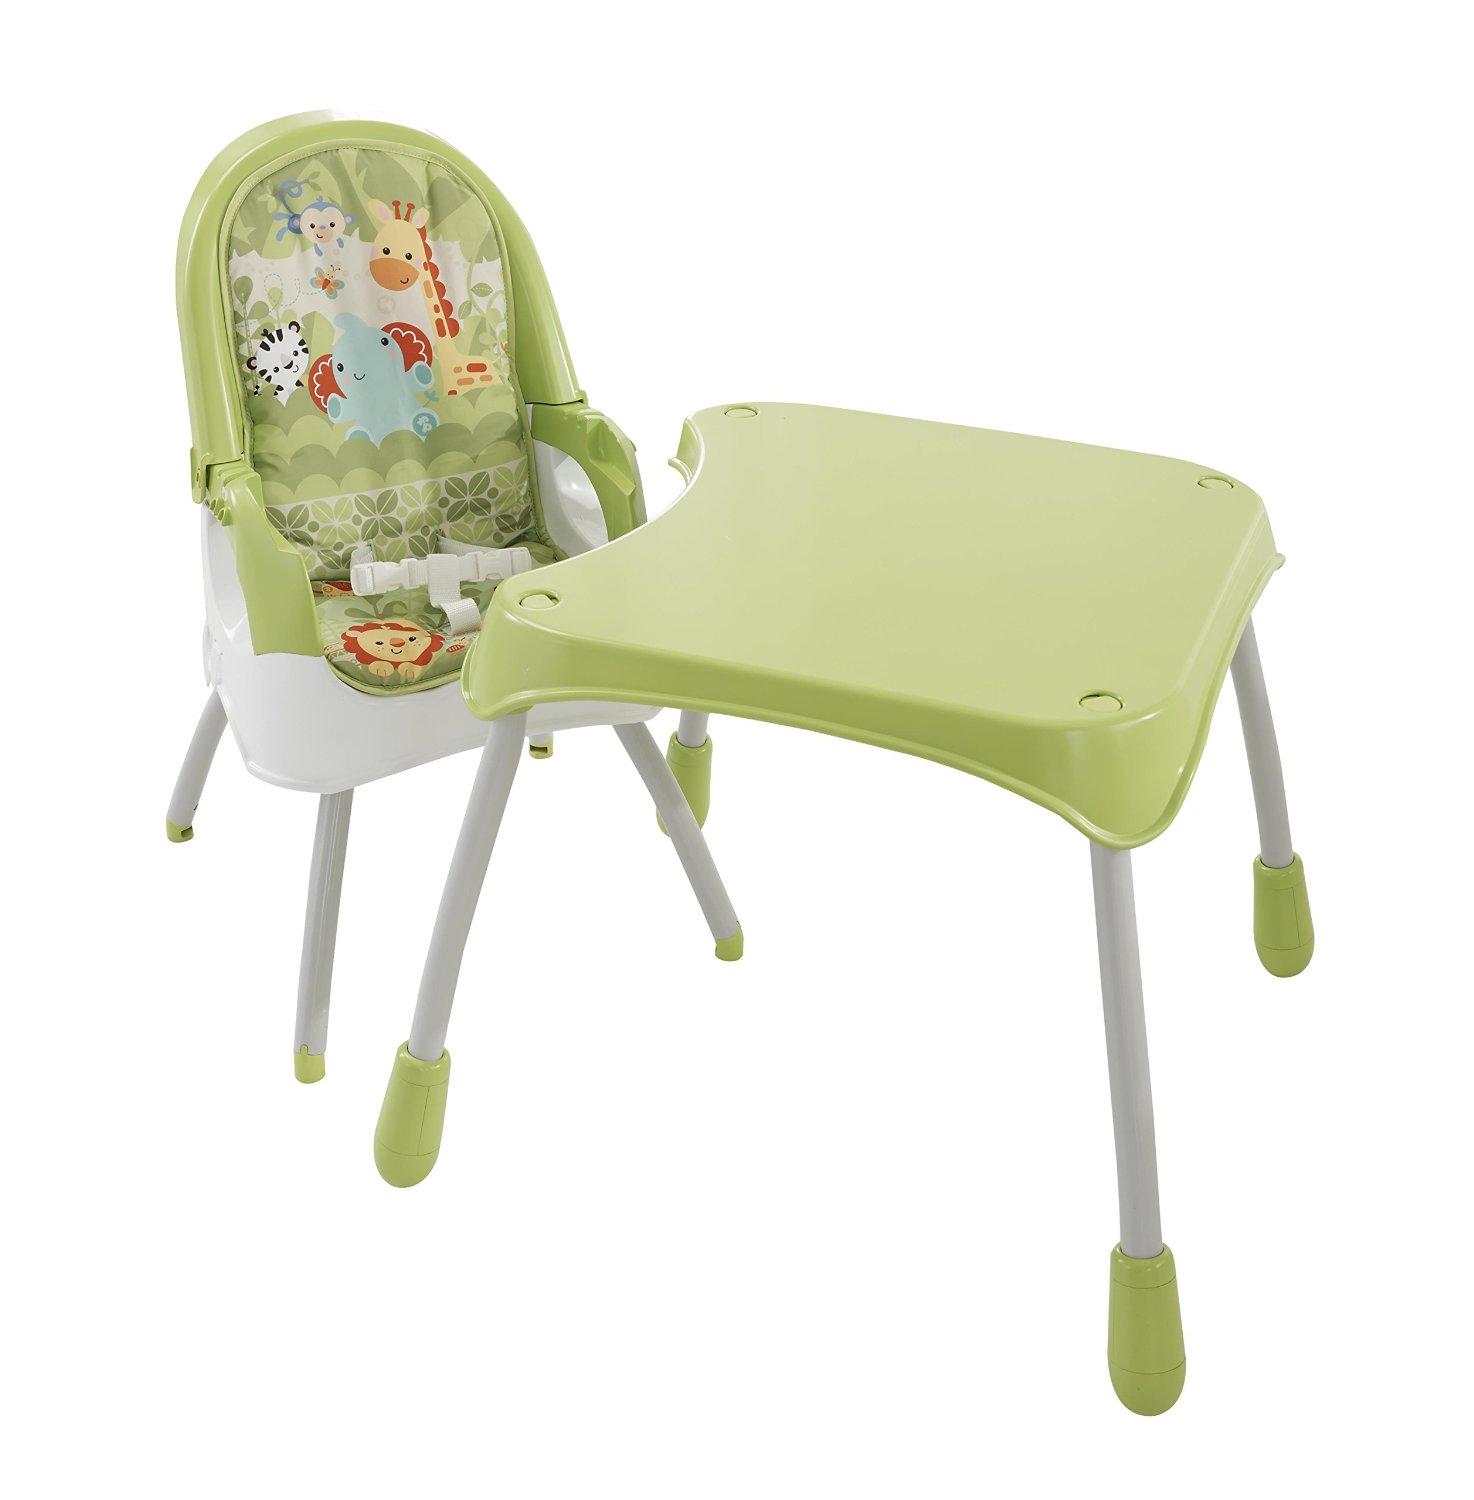 4 in 1 High Chair